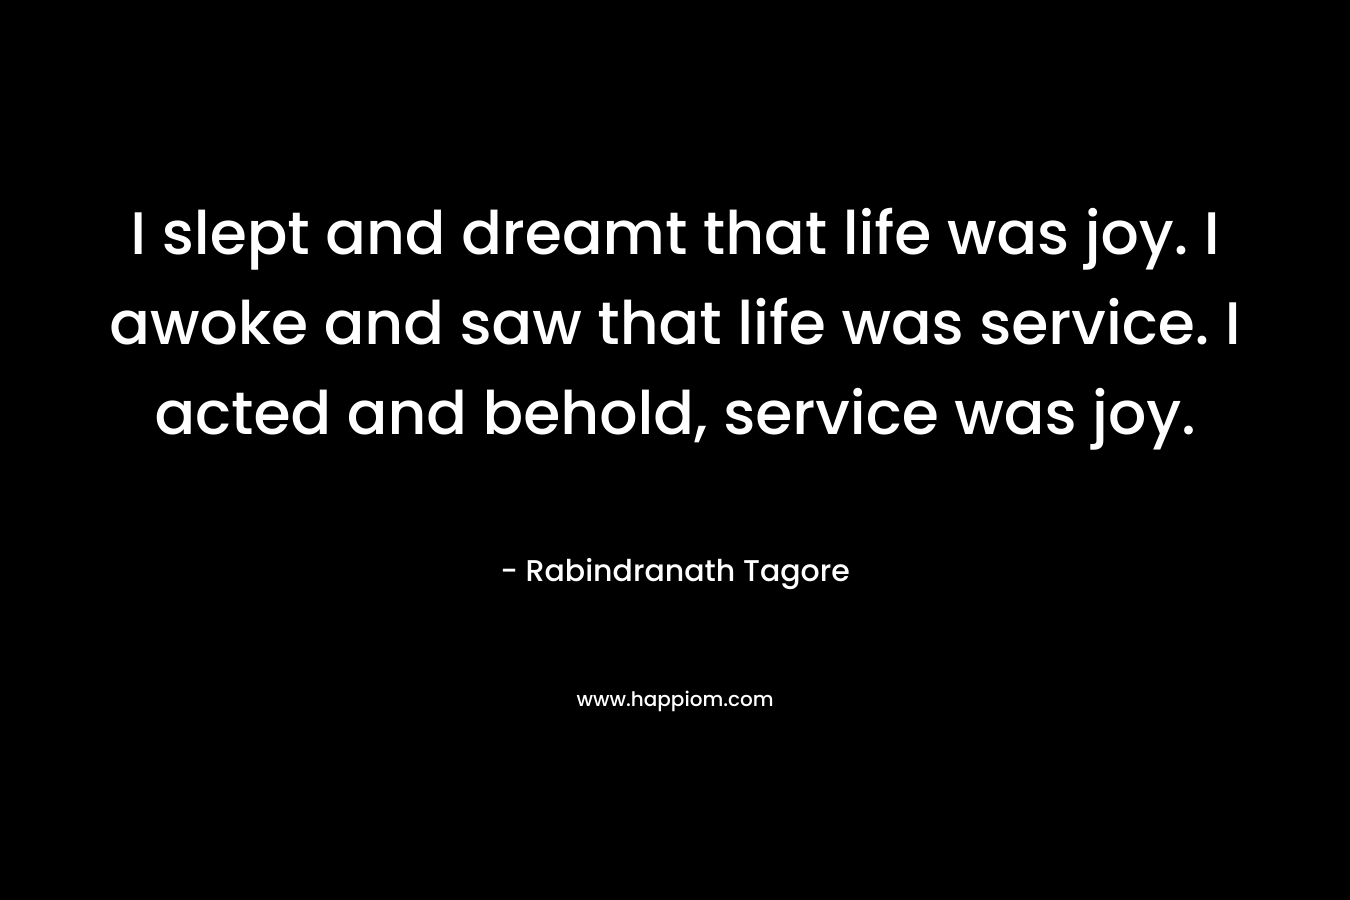 I slept and dreamt that life was joy. I awoke and saw that life was service. I acted and behold, service was joy.